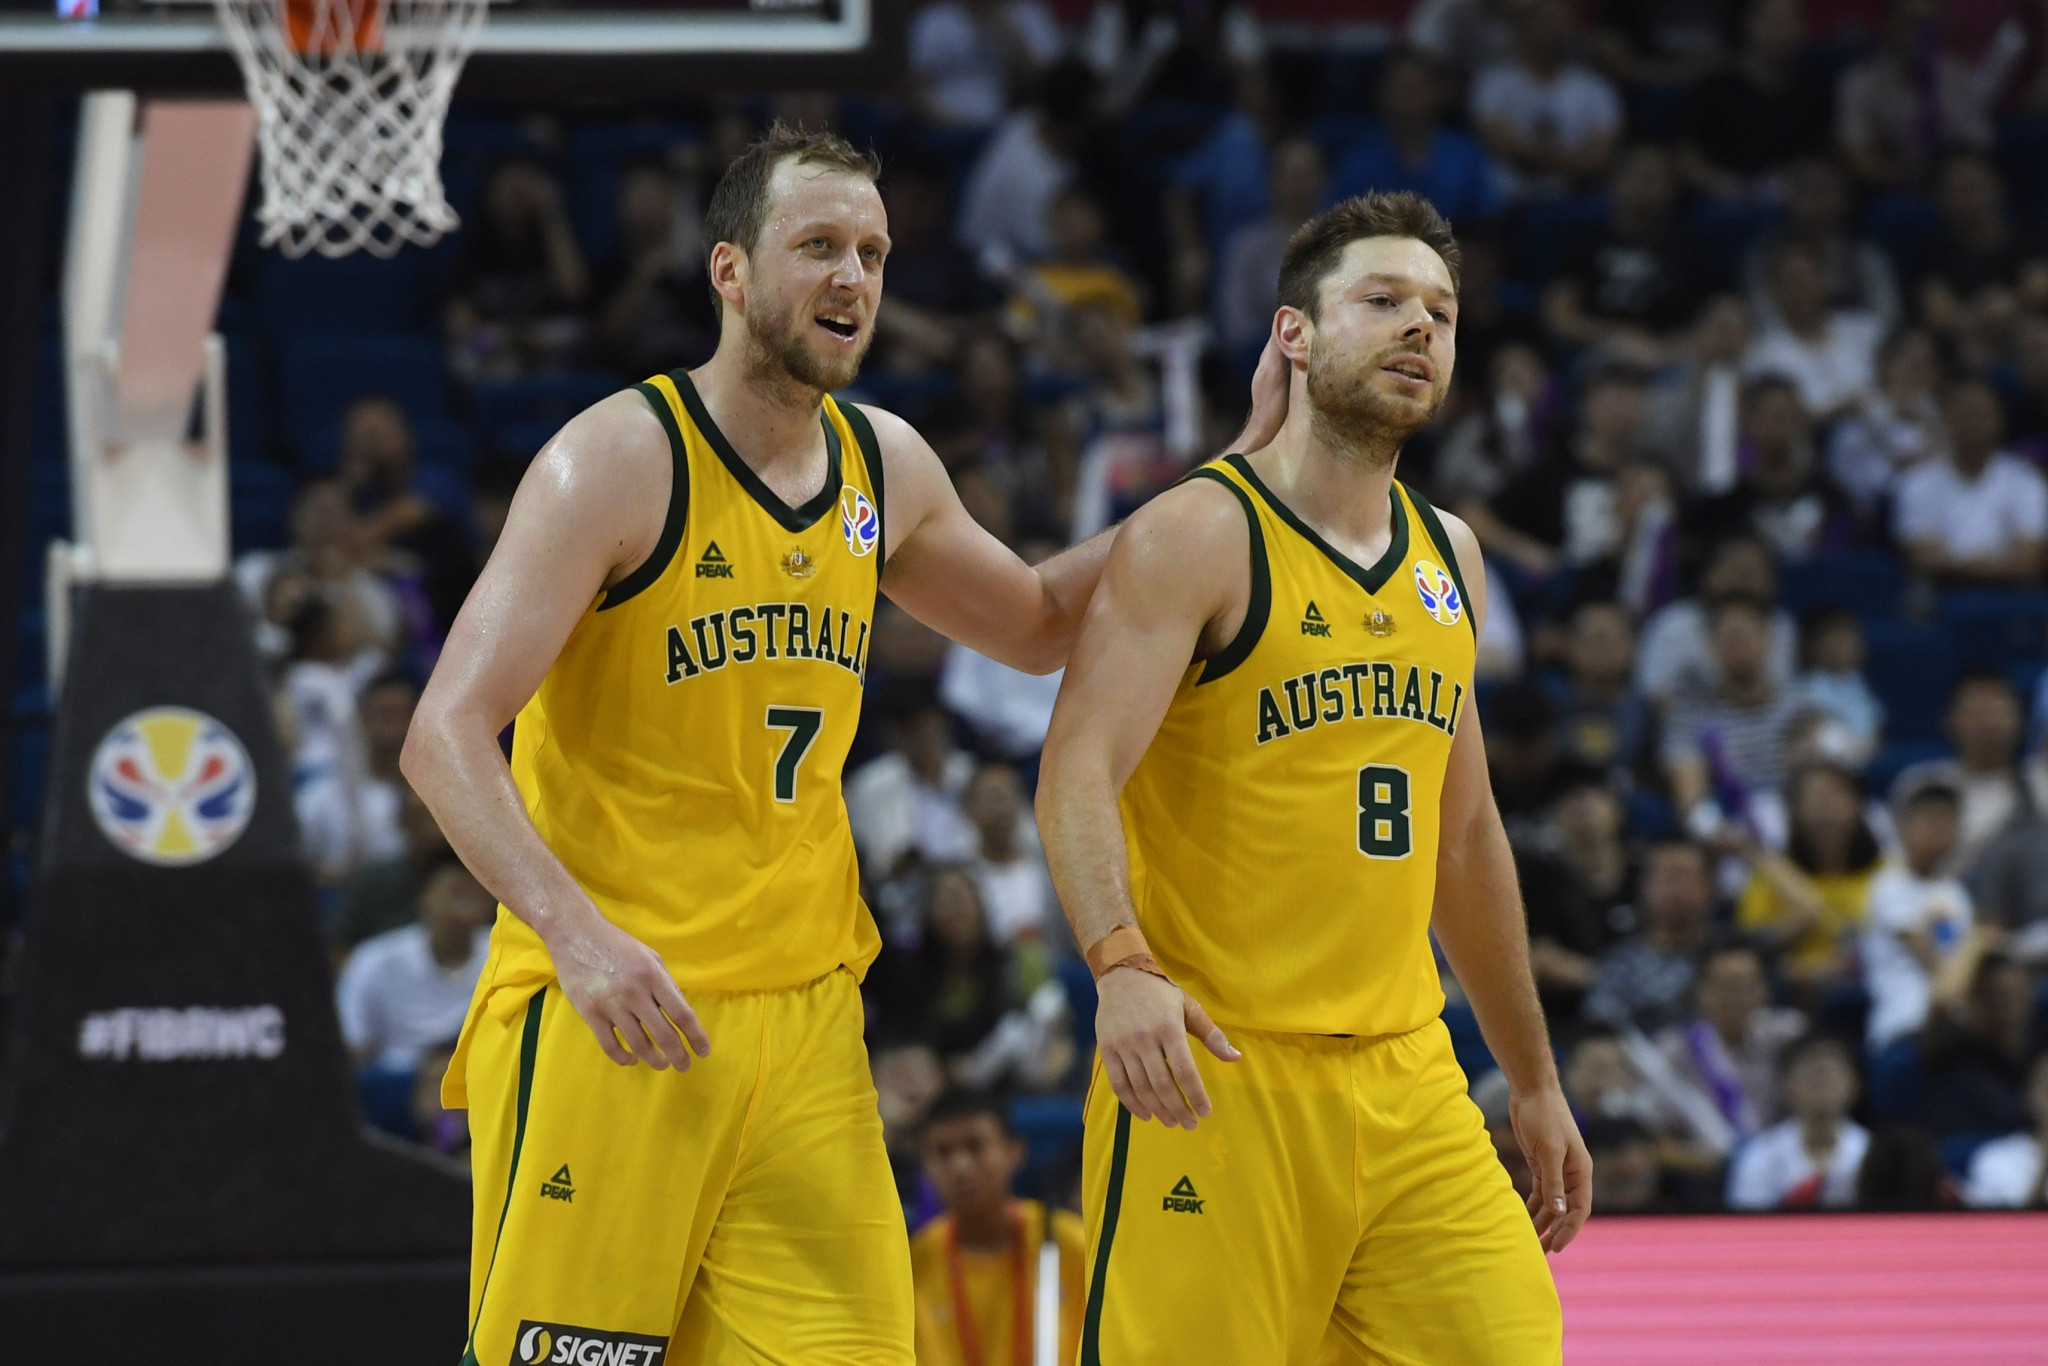 Australia reached the quarter-finals of the World Cup in China ©Getty Images